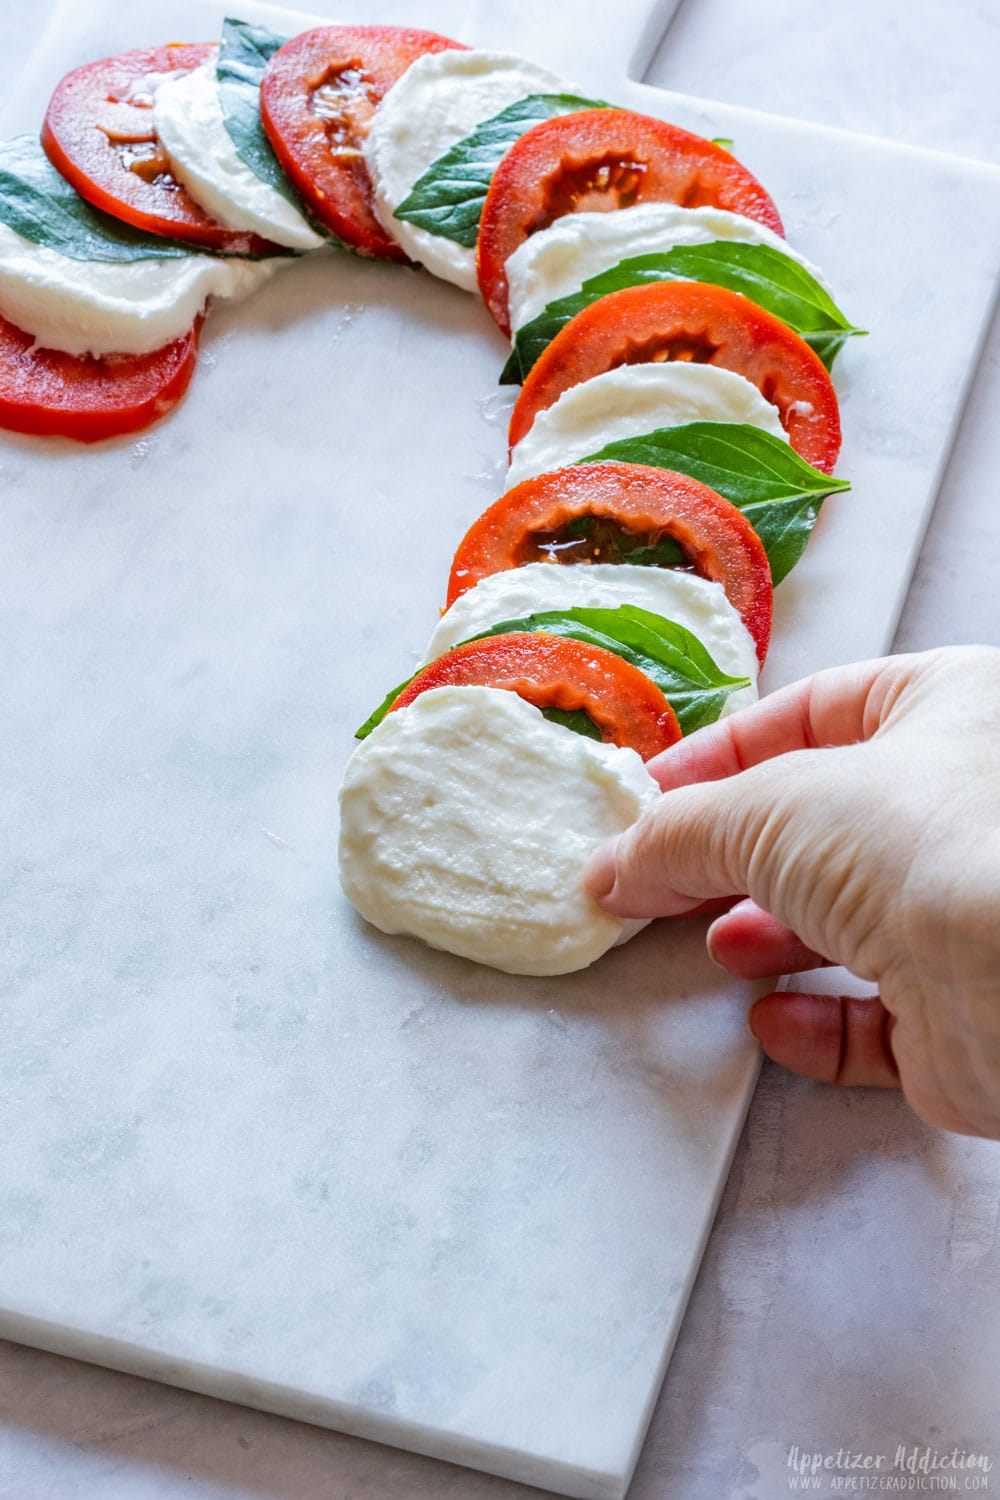 Placing sliced mozzarella to Caprese board shaped as candy cane.